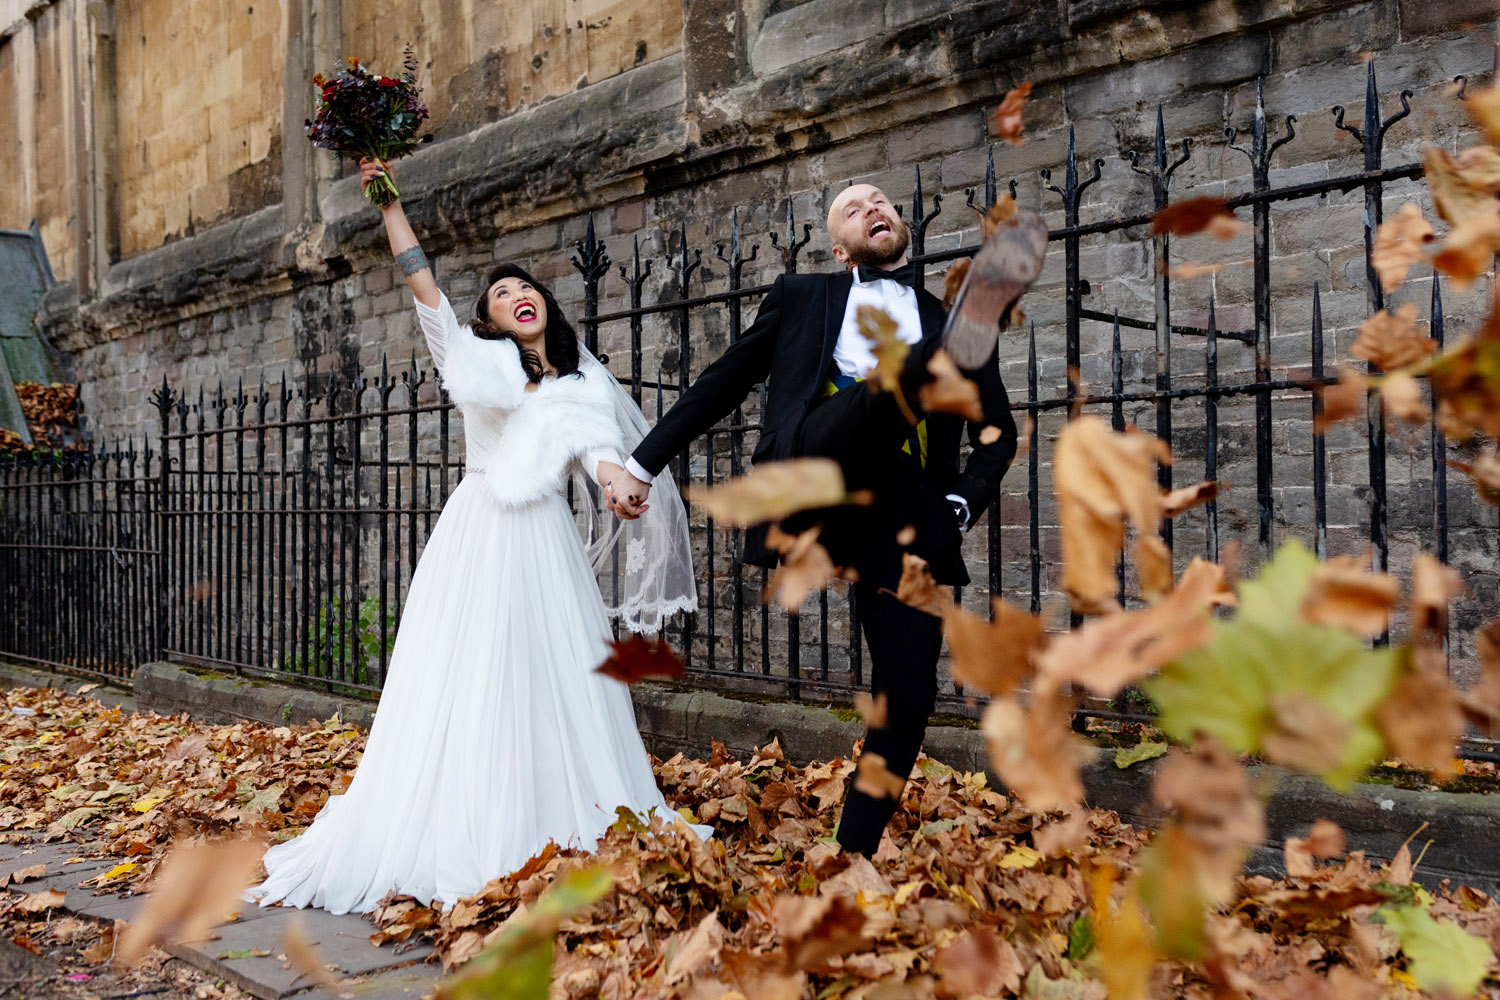 Playful wedding photography of newlyweds kicking autumn leaves. The bride holds a bouquet high in celebration. The groom's just kicked leaves towards the camera. With Martin Dabek Photography